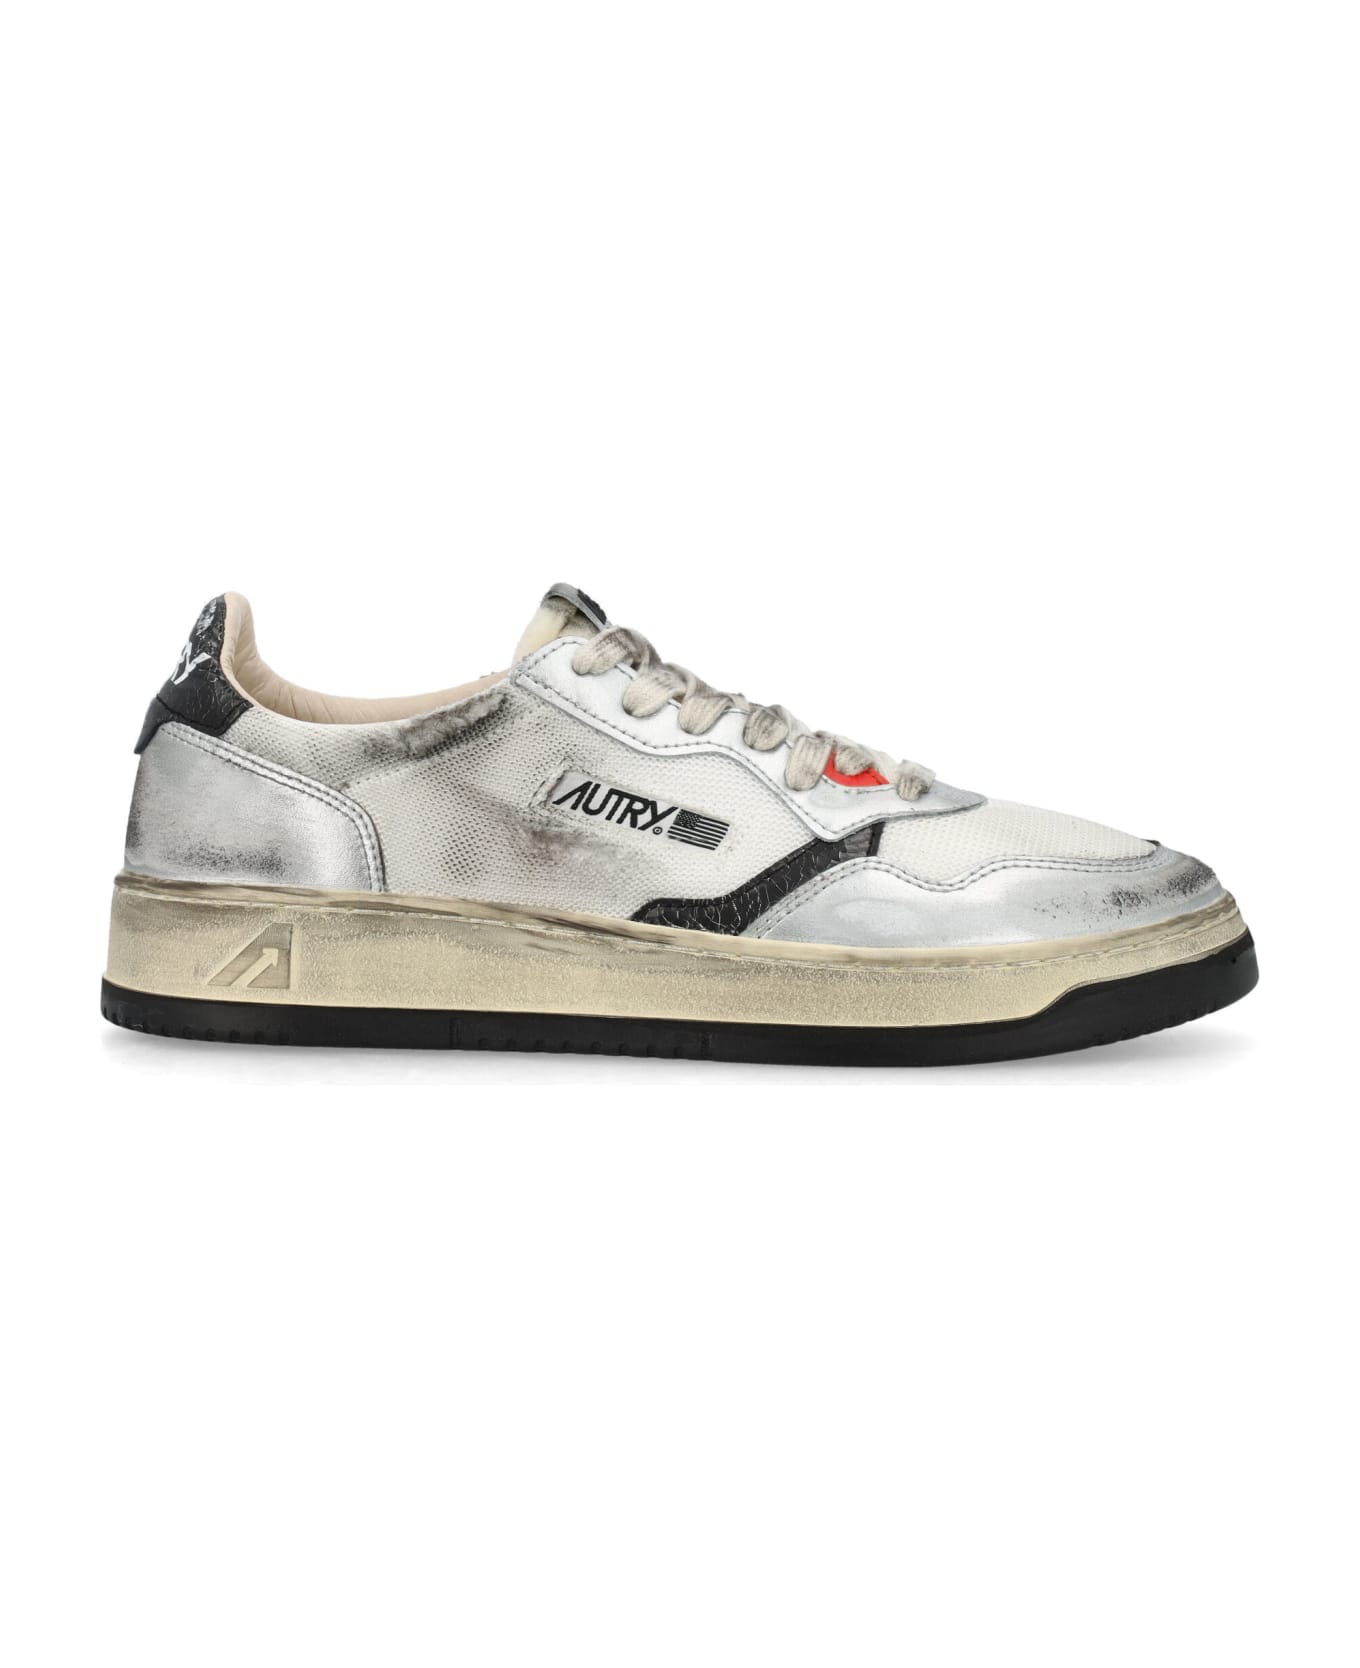 Autry Medalist Super Vintage Low Sneakers - SILVER WHITE